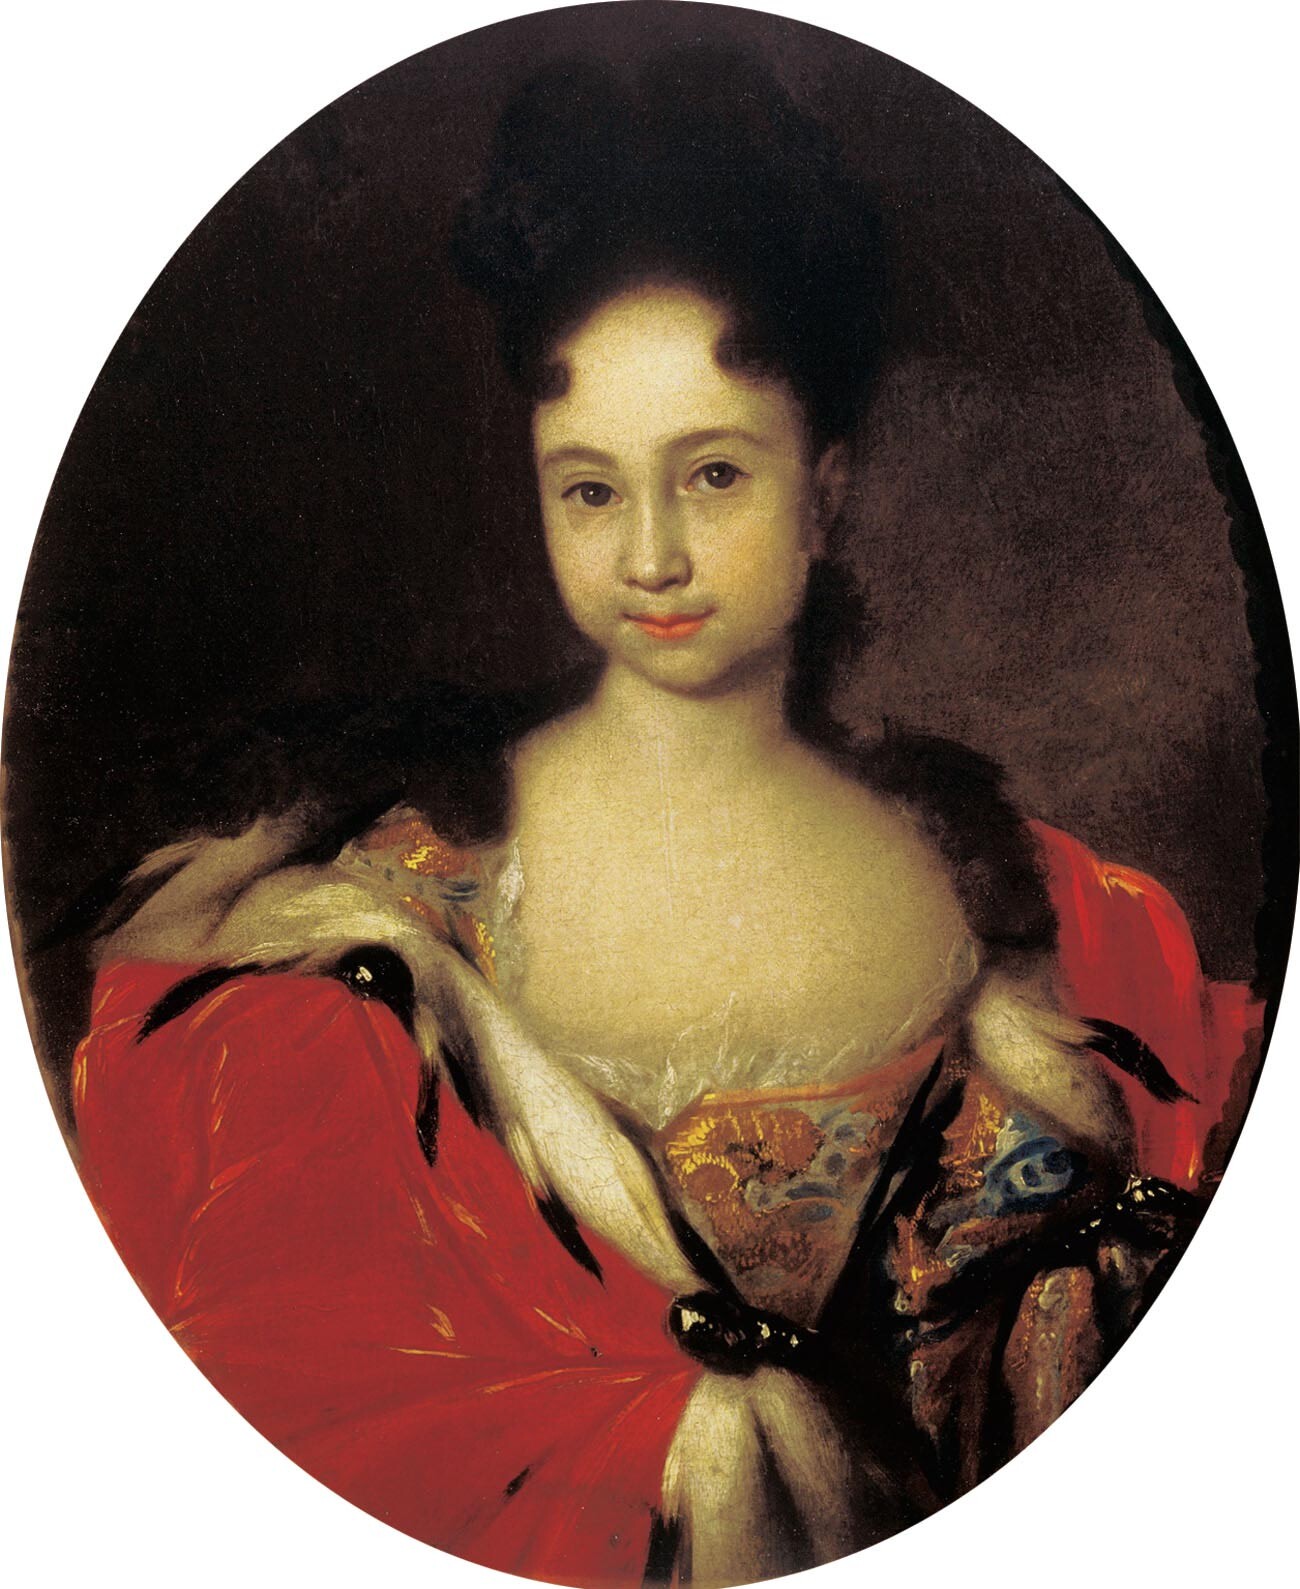 Anna in 1716. In the portrait, Anna is about six or seven years old, but her hair is done in an adult way and she is dressed like an grown-up lady